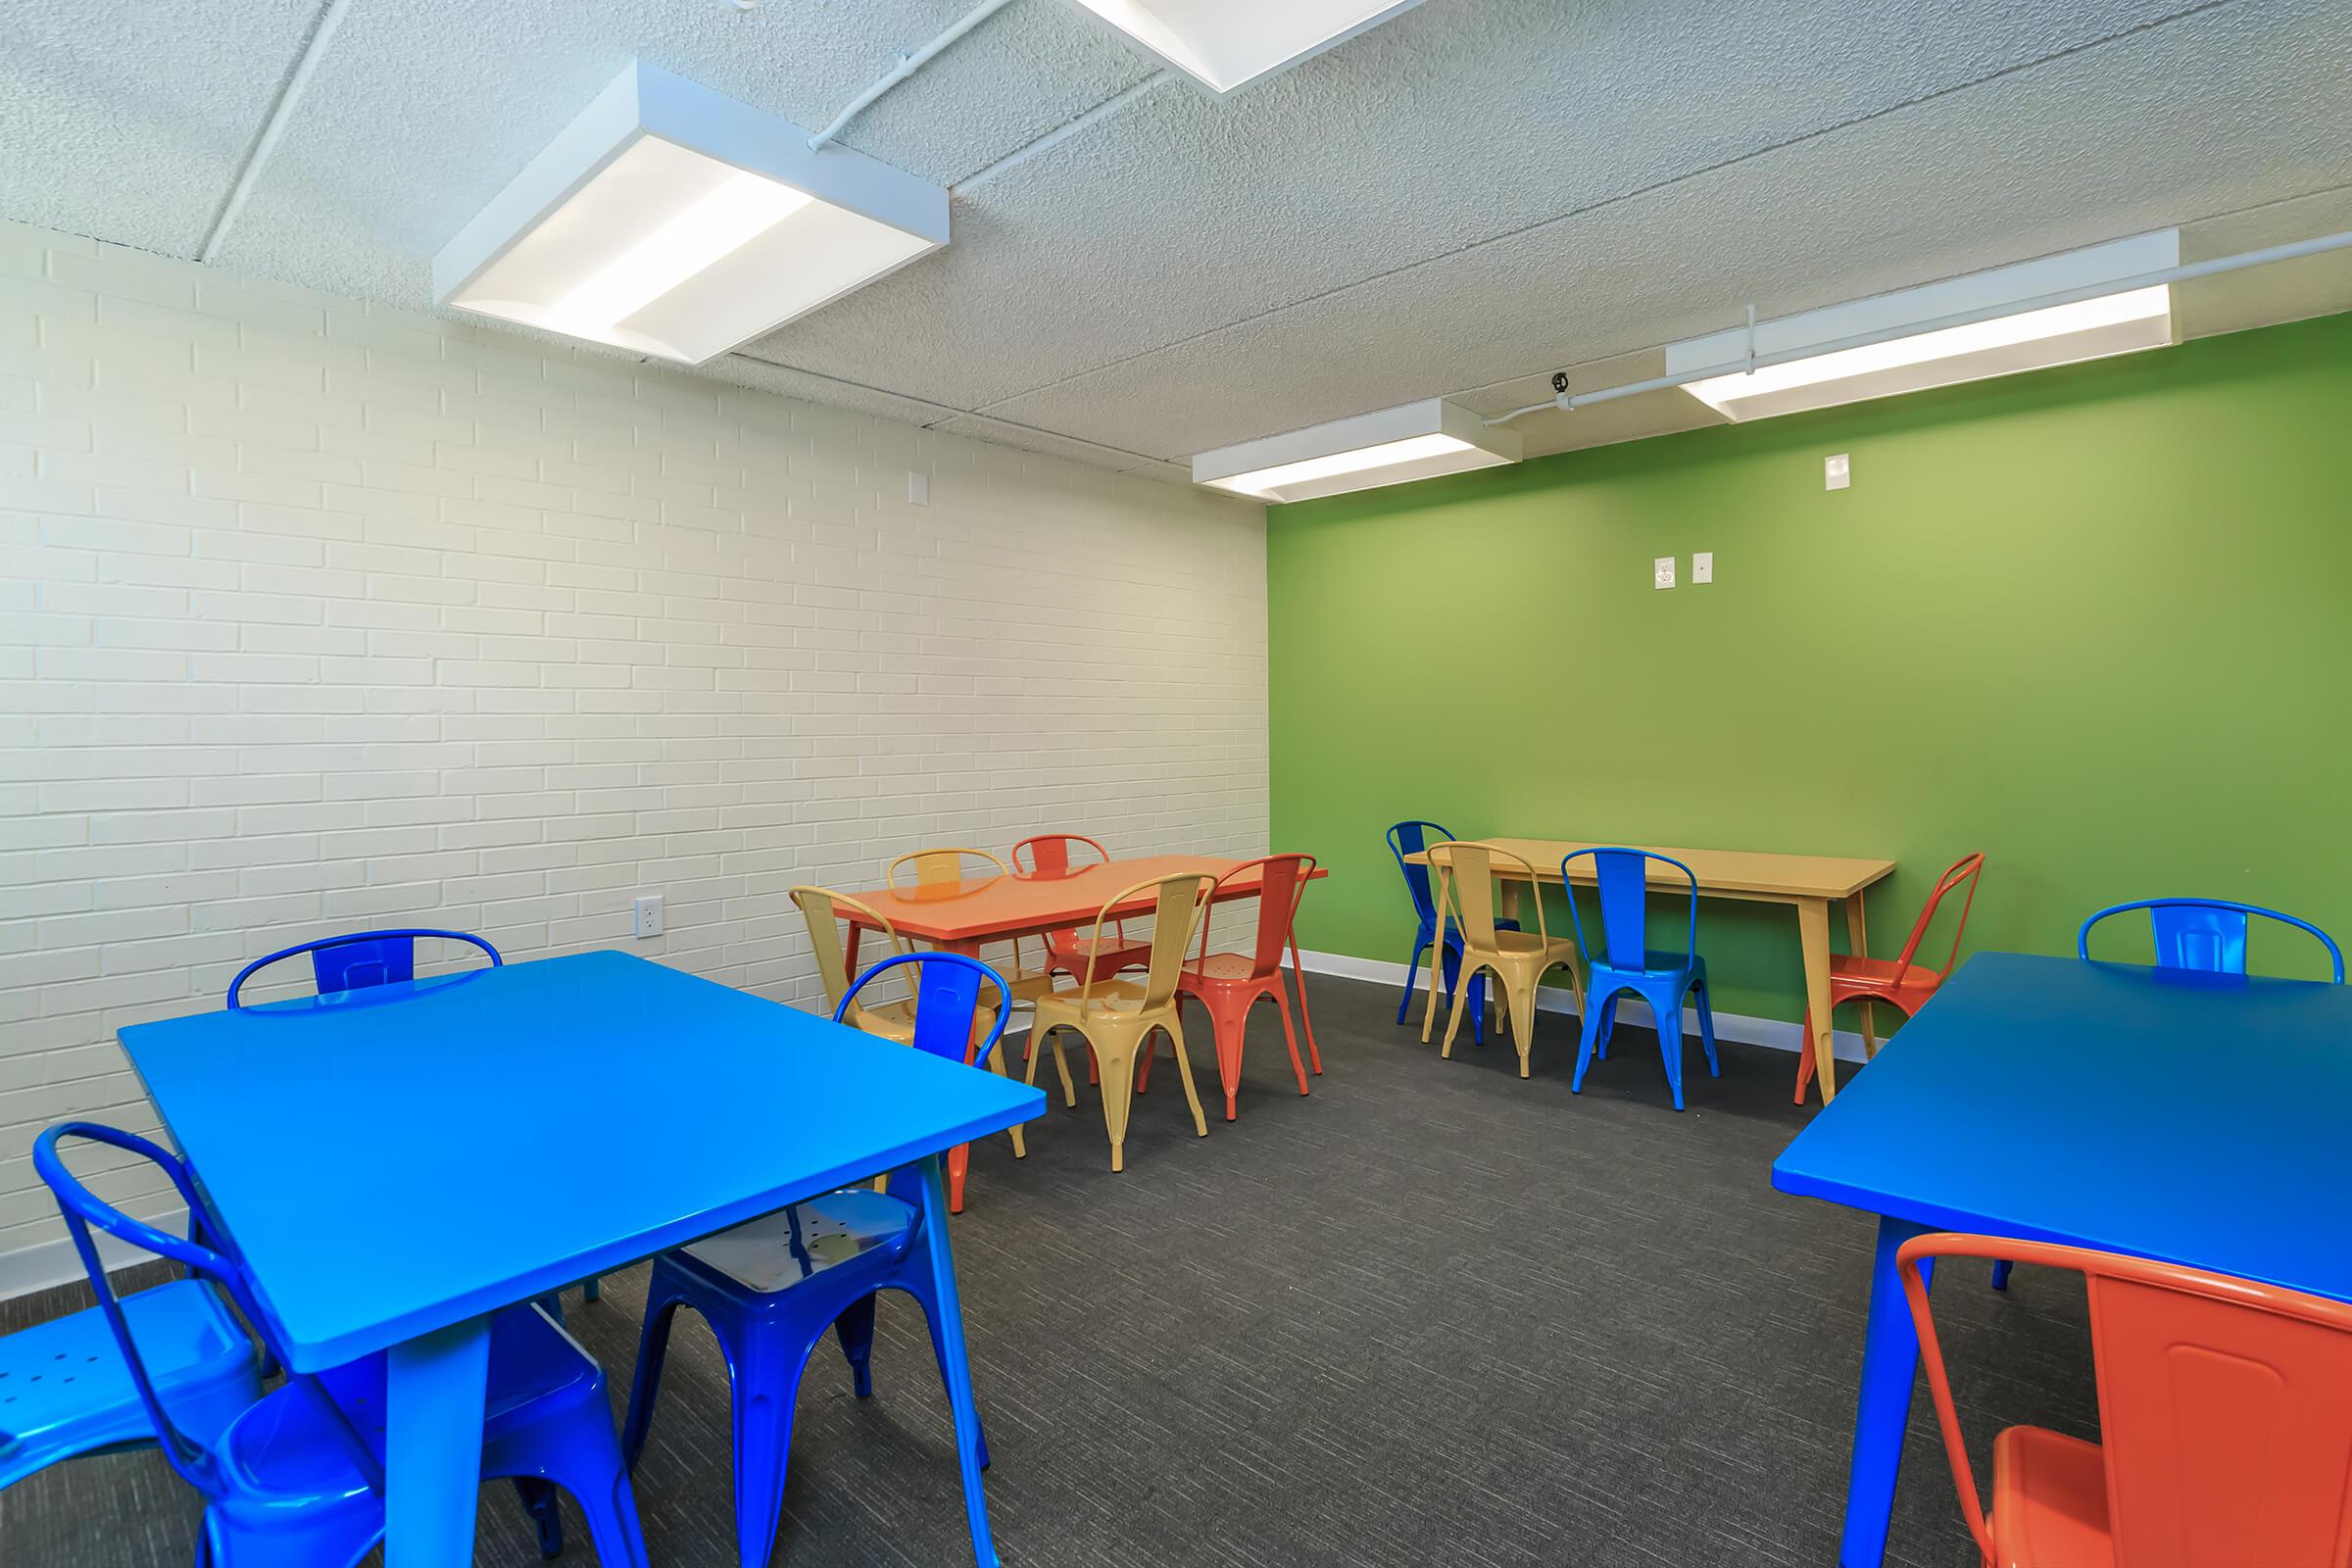 Linwood Square community room with blue tables and chairs